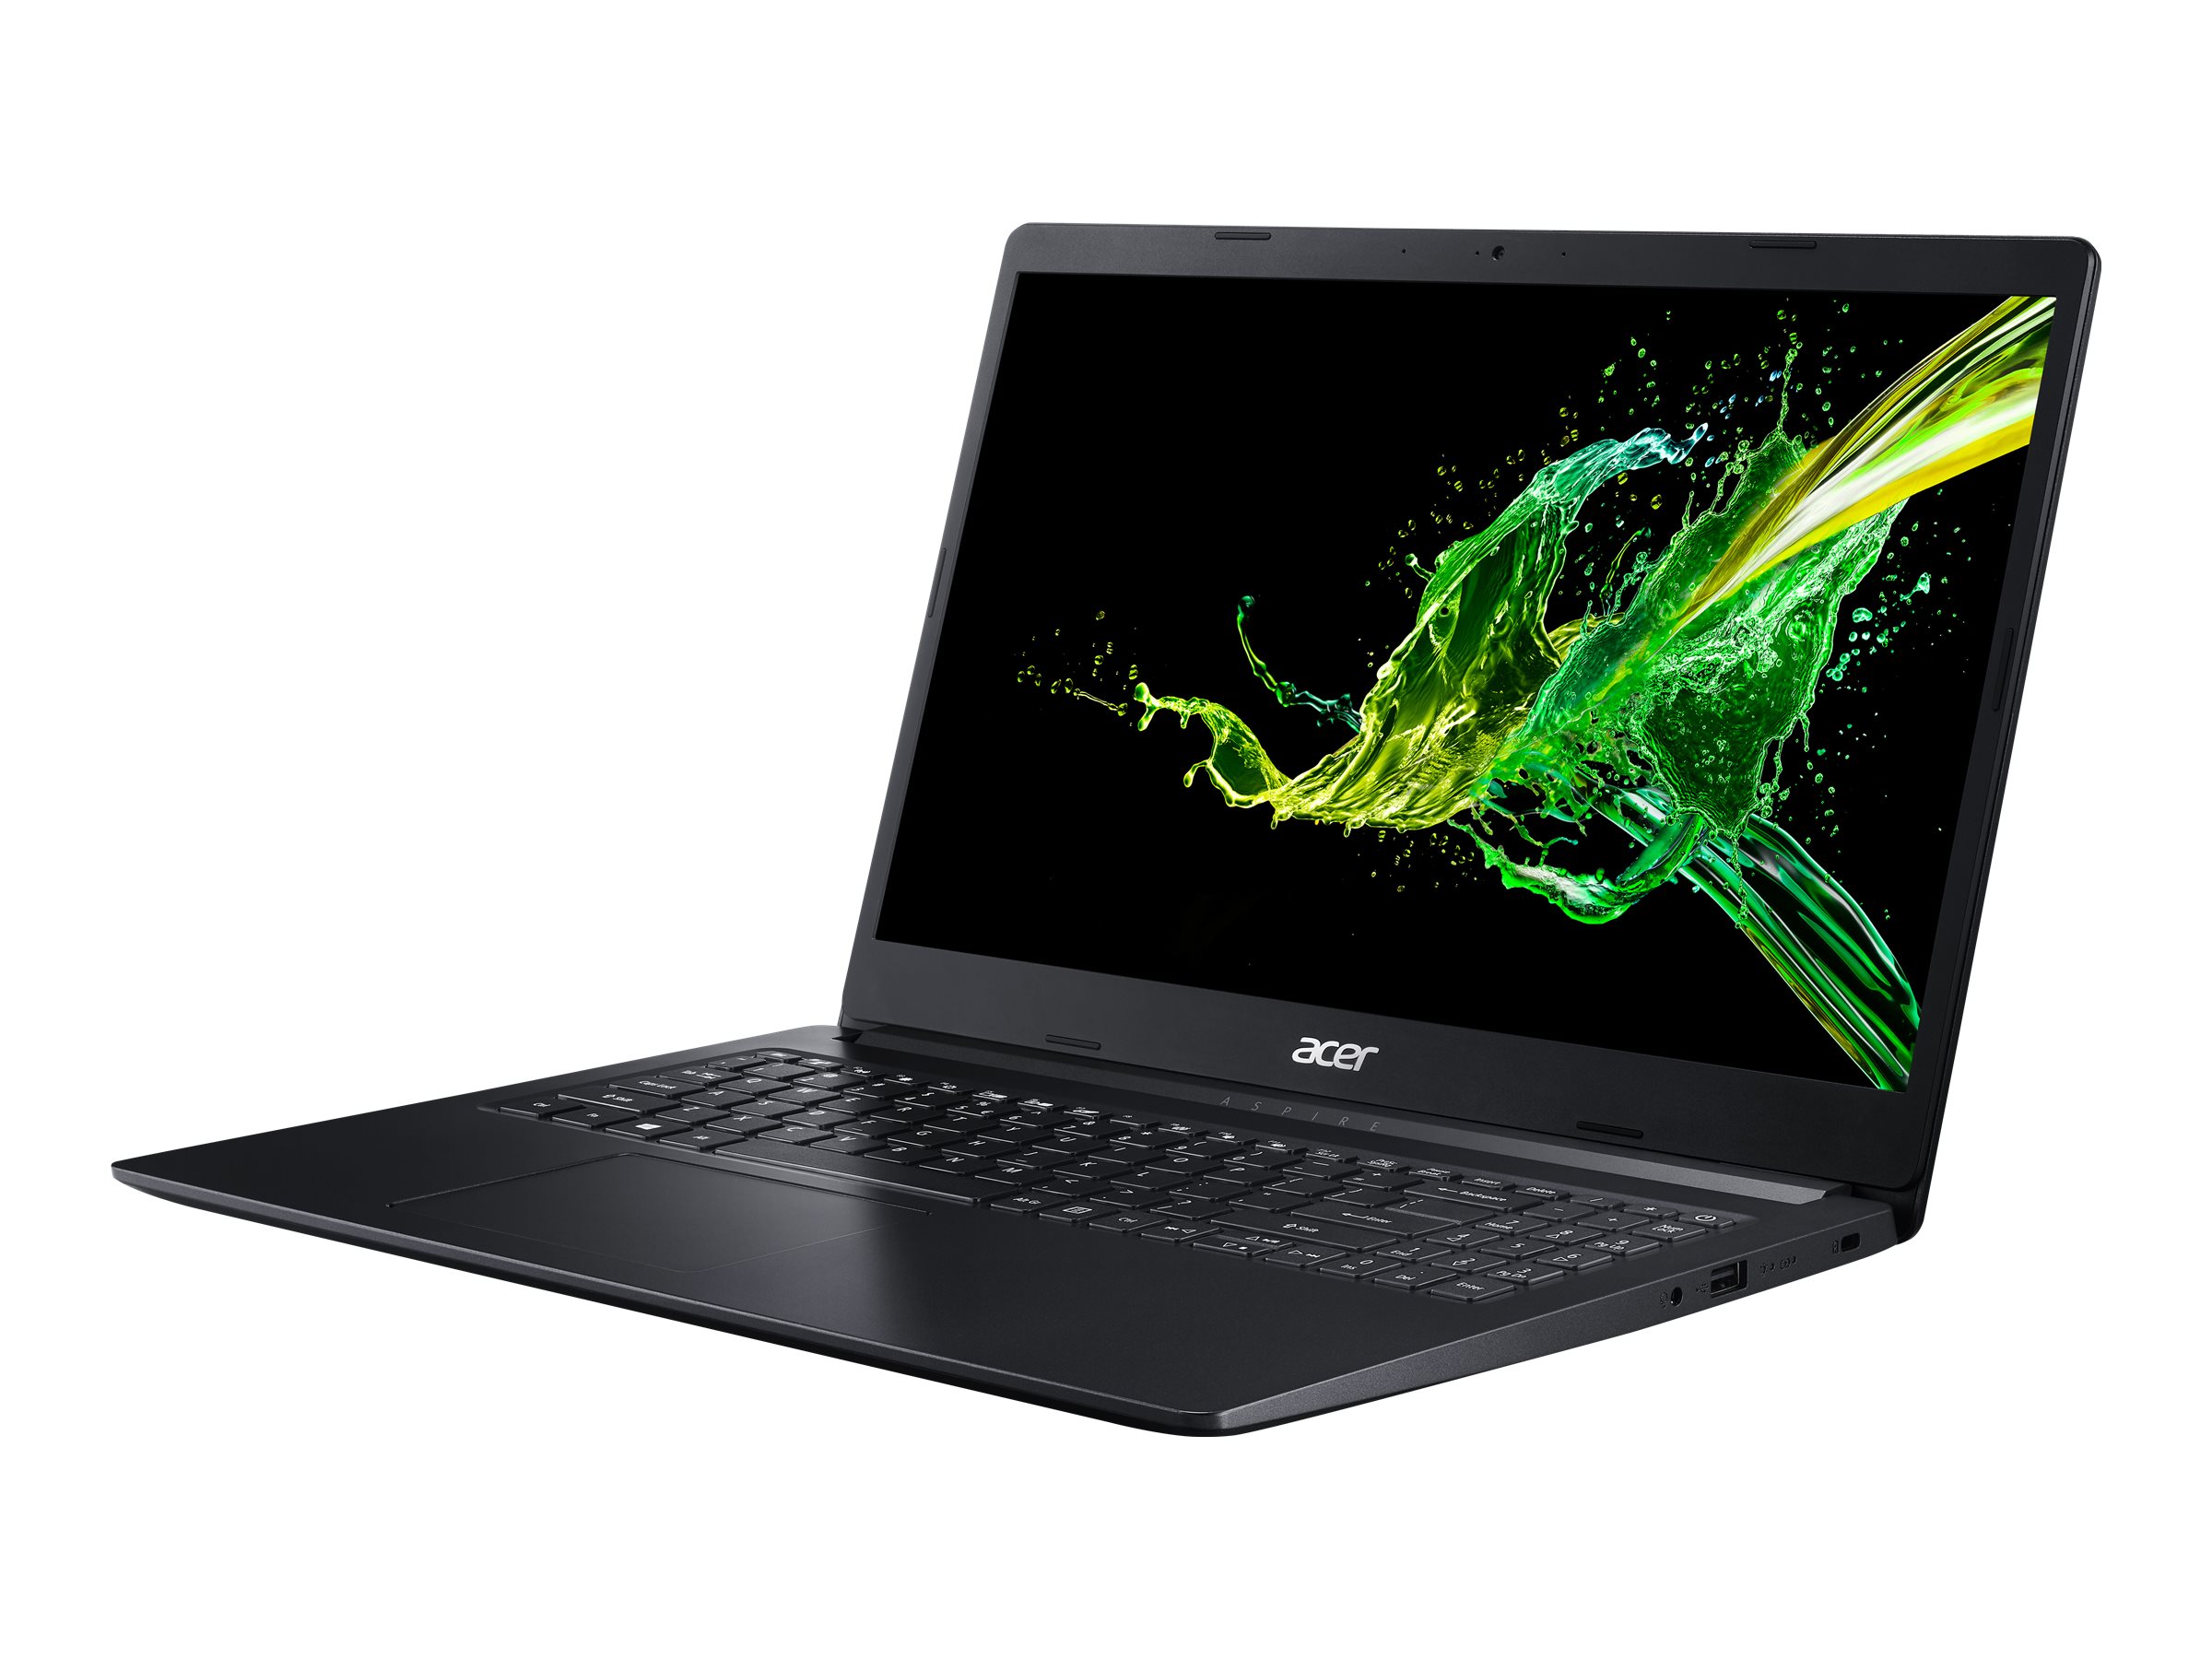 Restored Acer Aspire 1 A115-31-C2Y3, 15.6" Full HD Display, Intel Celeron N4020, 4GB DDR4, 64GB eMMC, 802.11ac Wi-Fi 5, Up to 10-Hours of Battery Life, Windows 10 in S mode, Black (Refurbished) - image 1 of 4